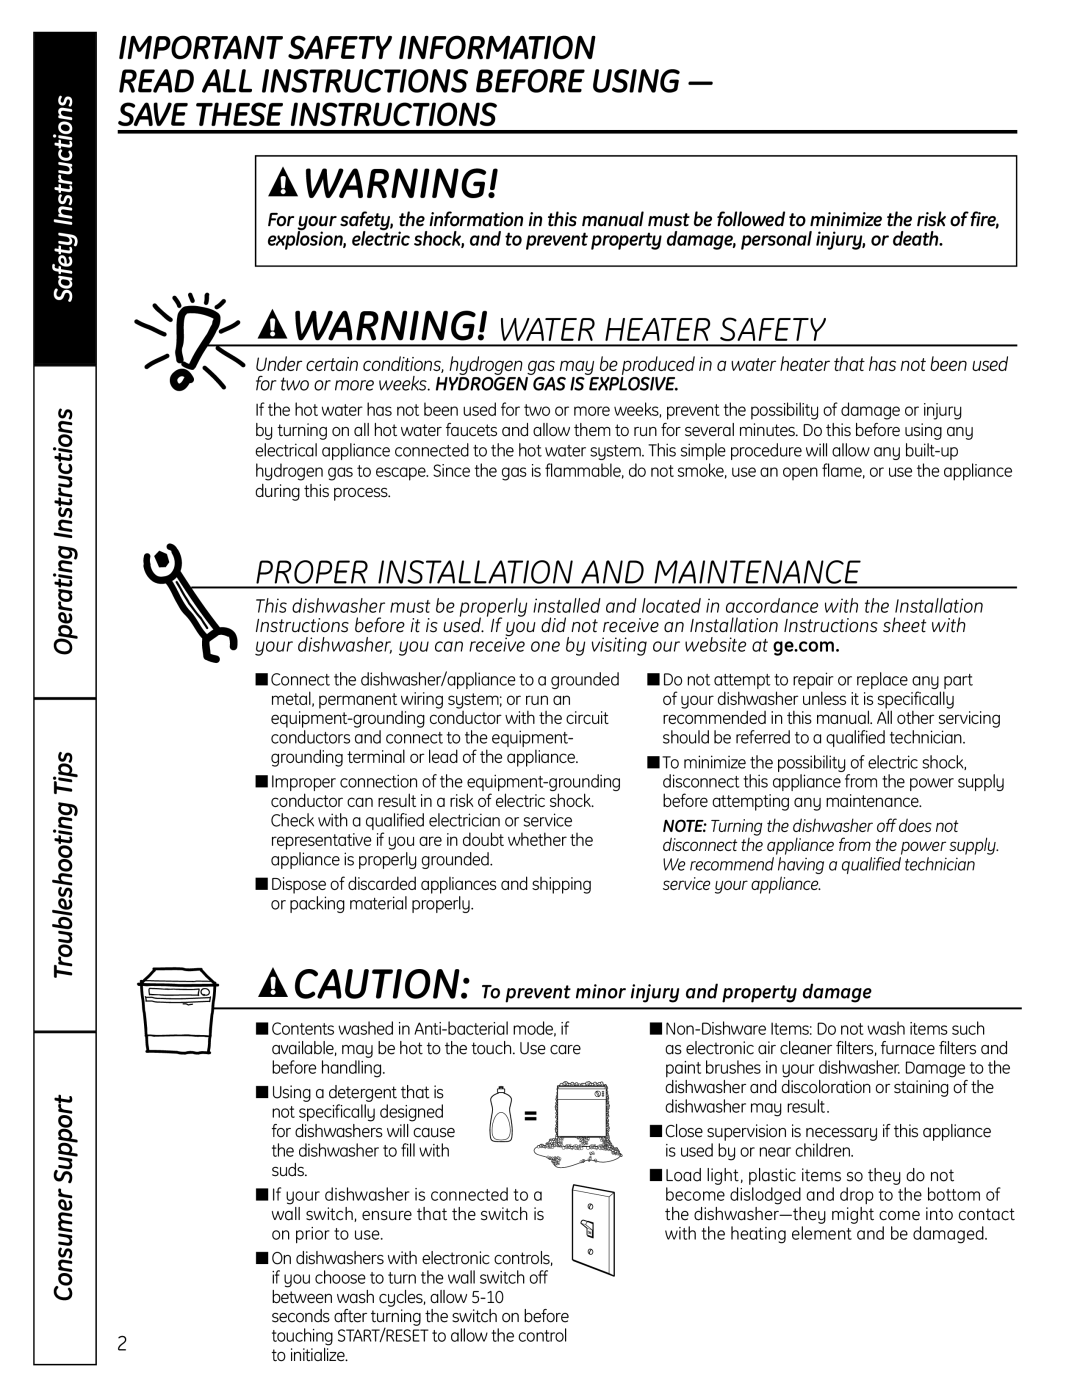 GE GSD2000 Important Safety Information, Read All Instructions Before Using, Save These Instructions, Safety Instructions 